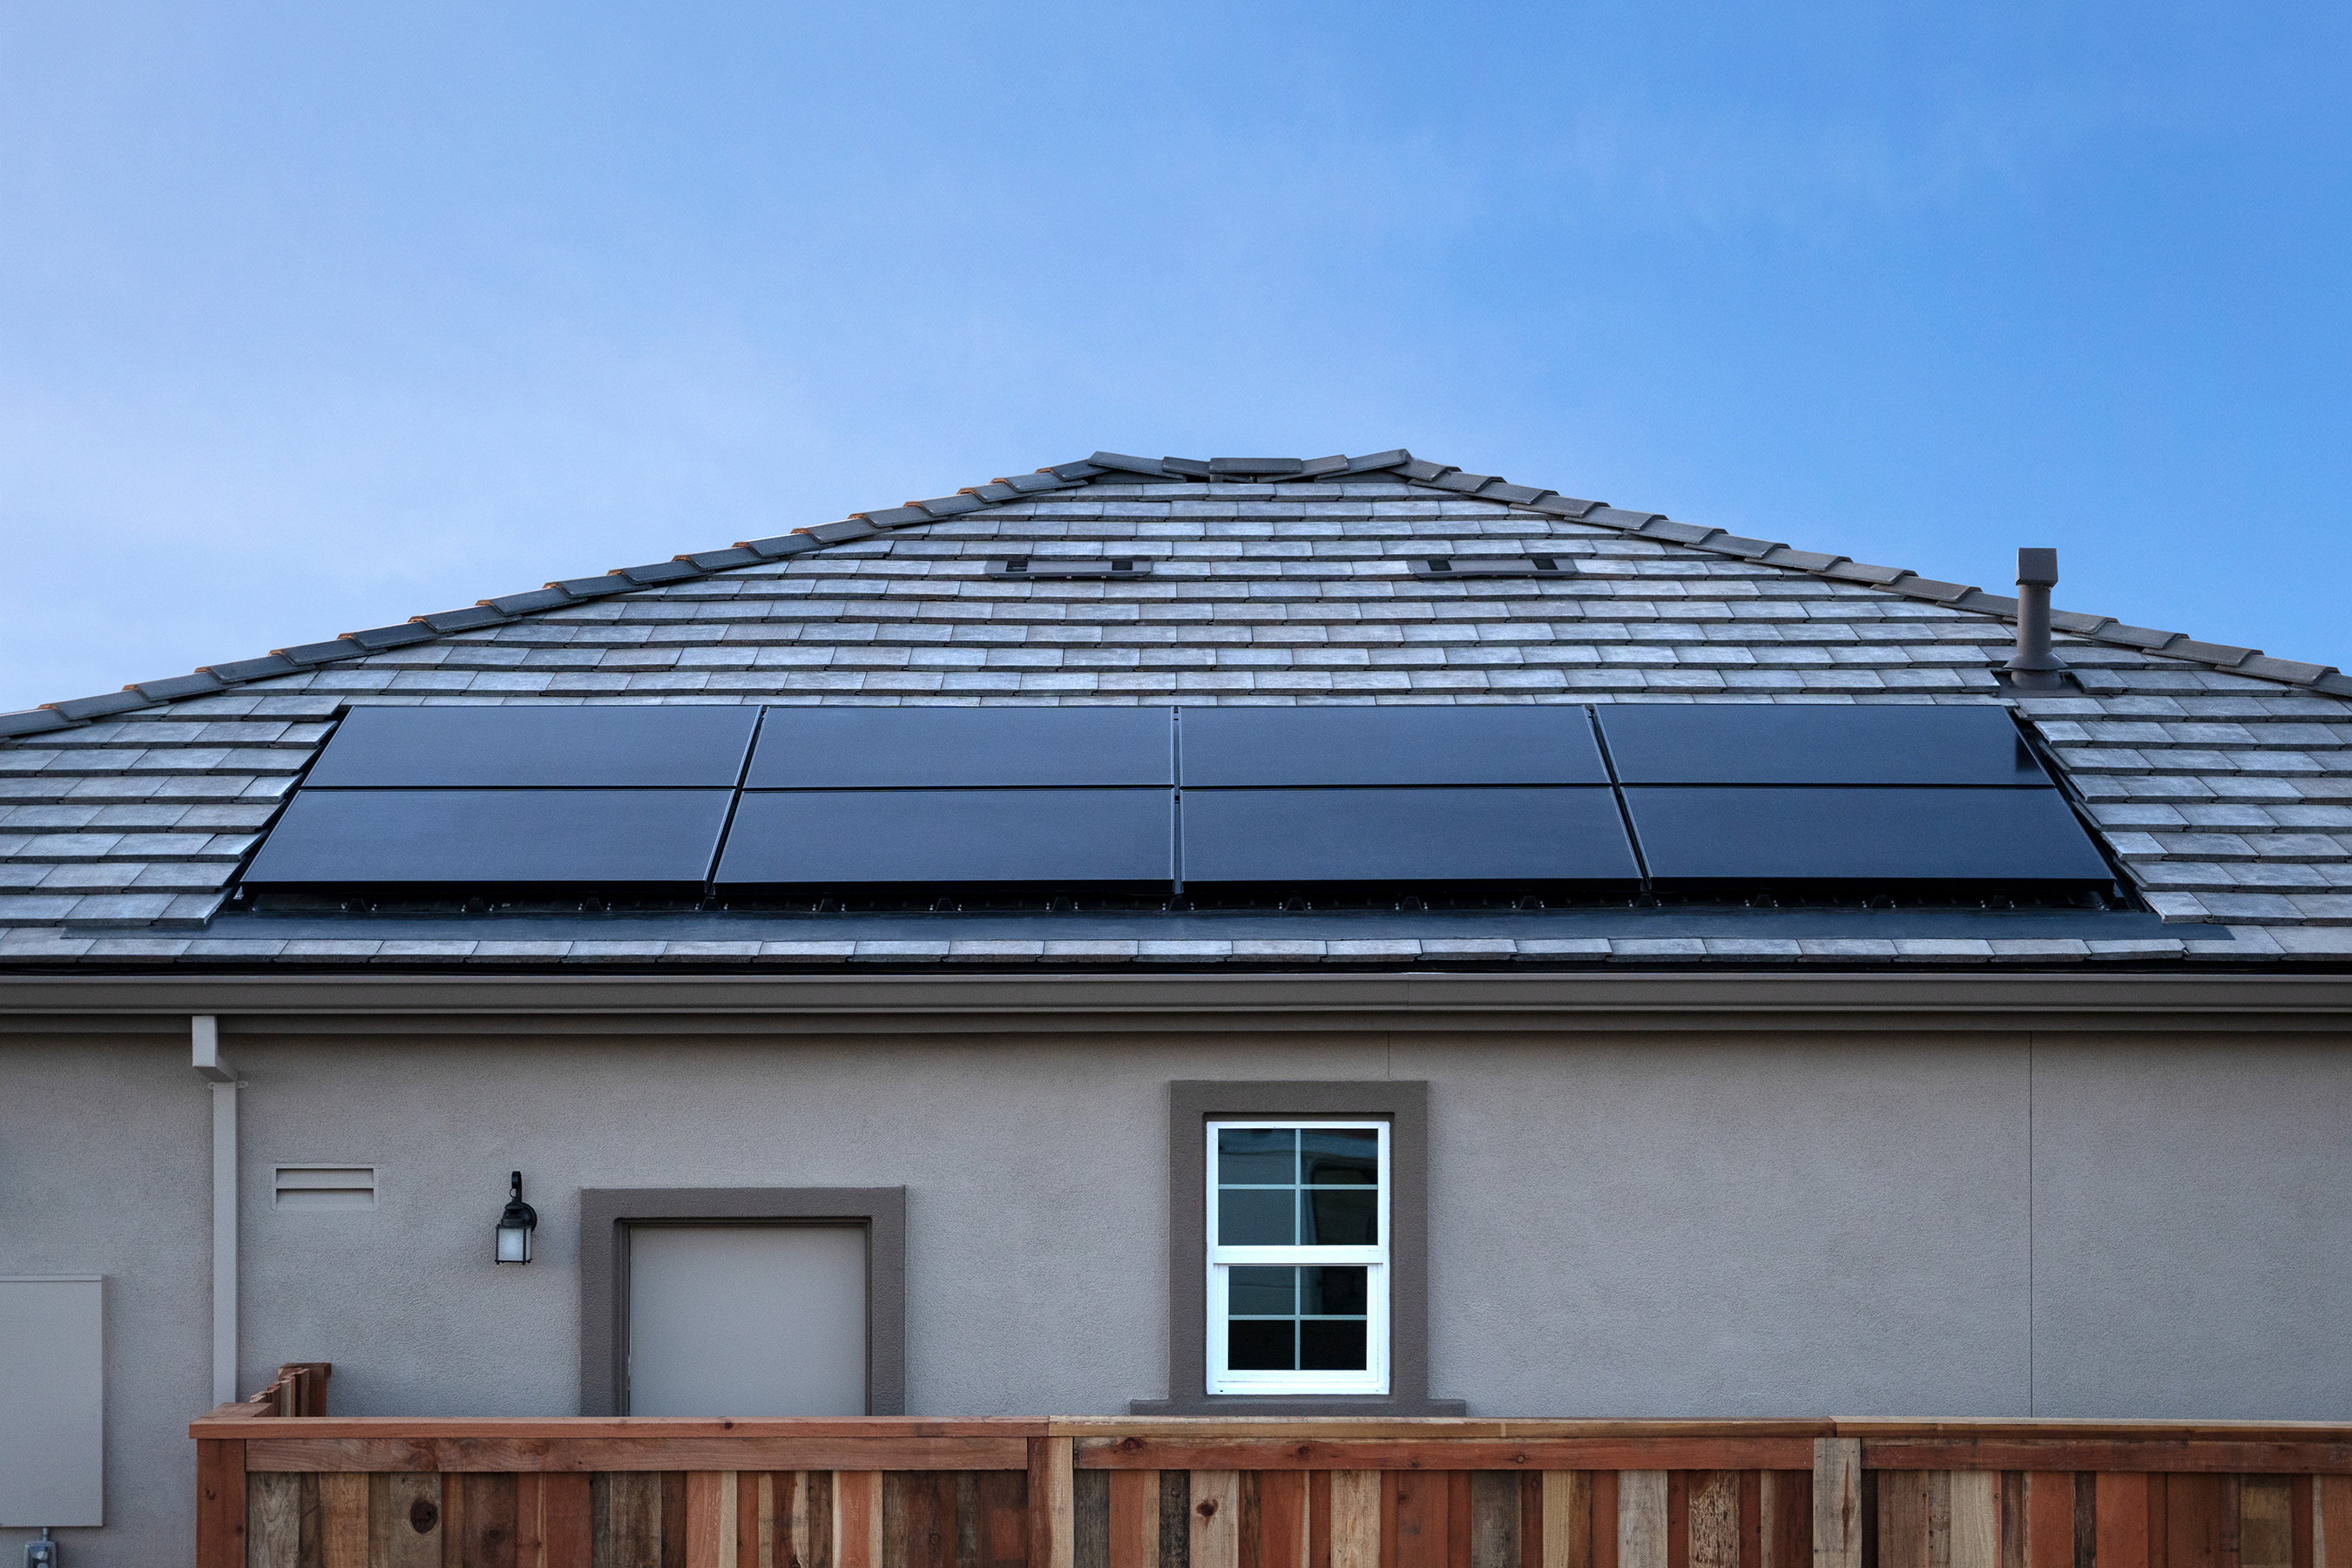 Our OneRoof™ system fits seamlessly with the rest of the roof for a sleek, low-profile look with virtually no visible parts. Except for those money-saving solar panels.